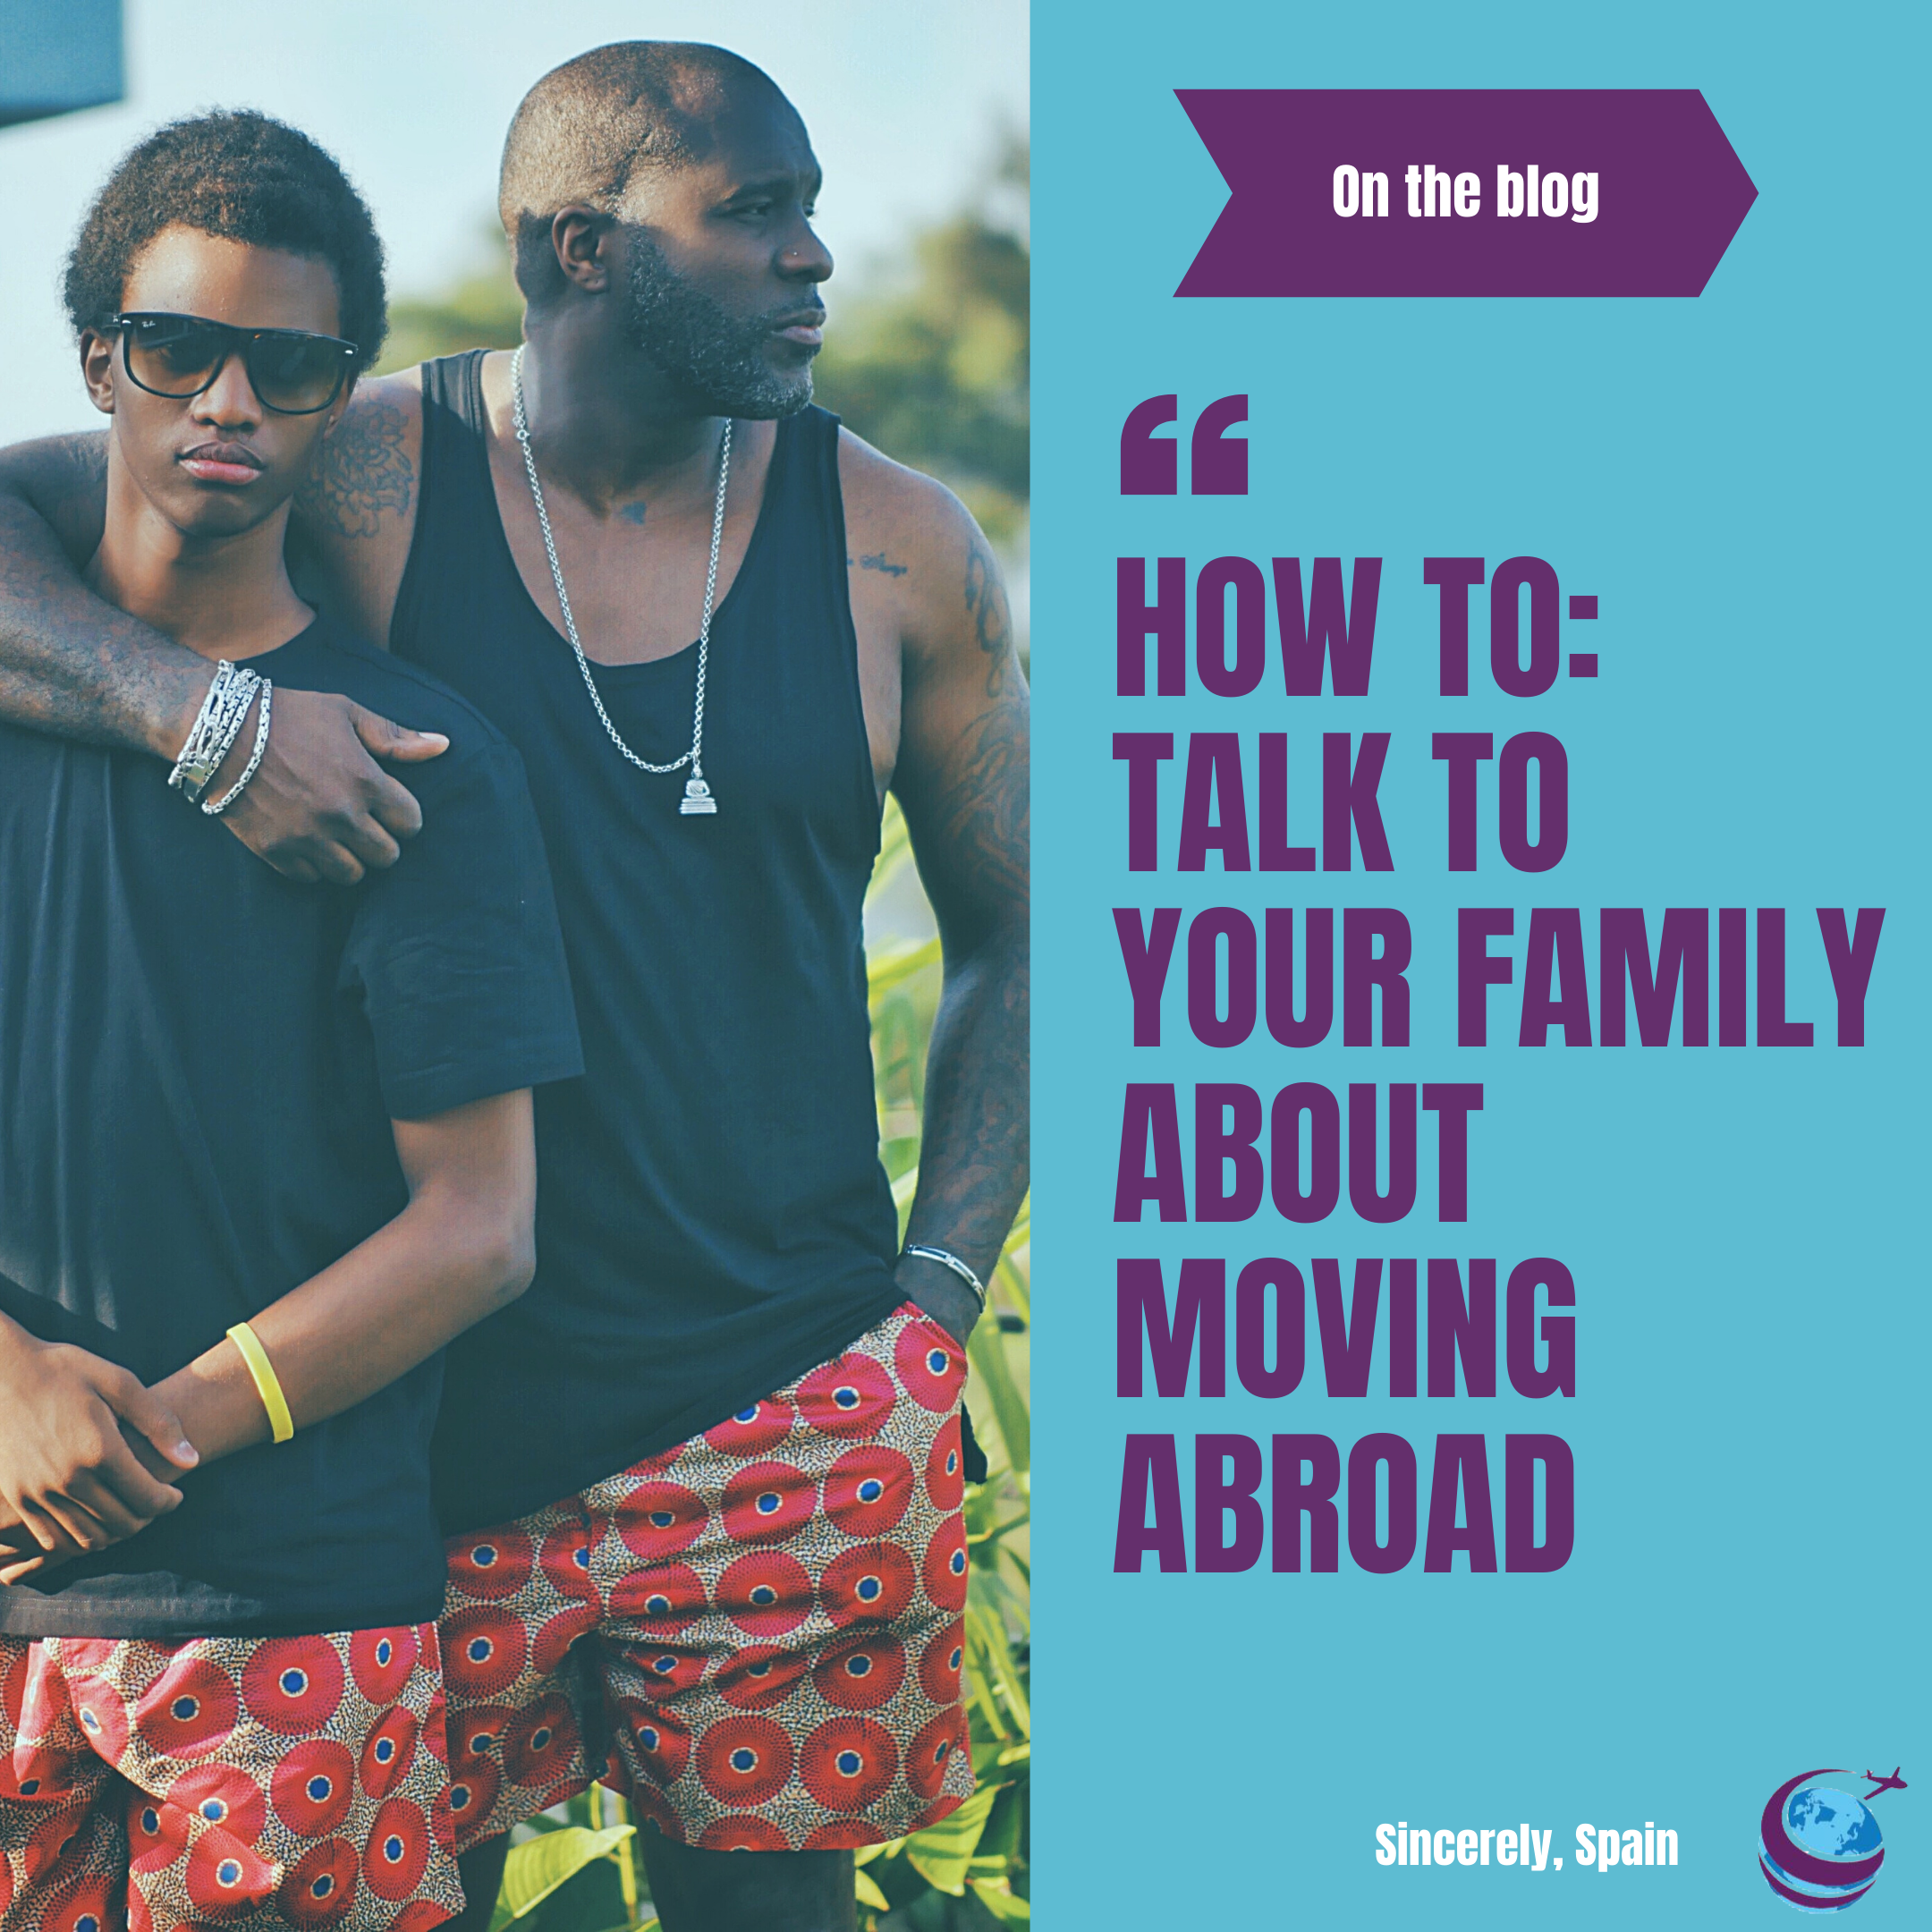 How to: Talk to Your Family About Moving Abroad